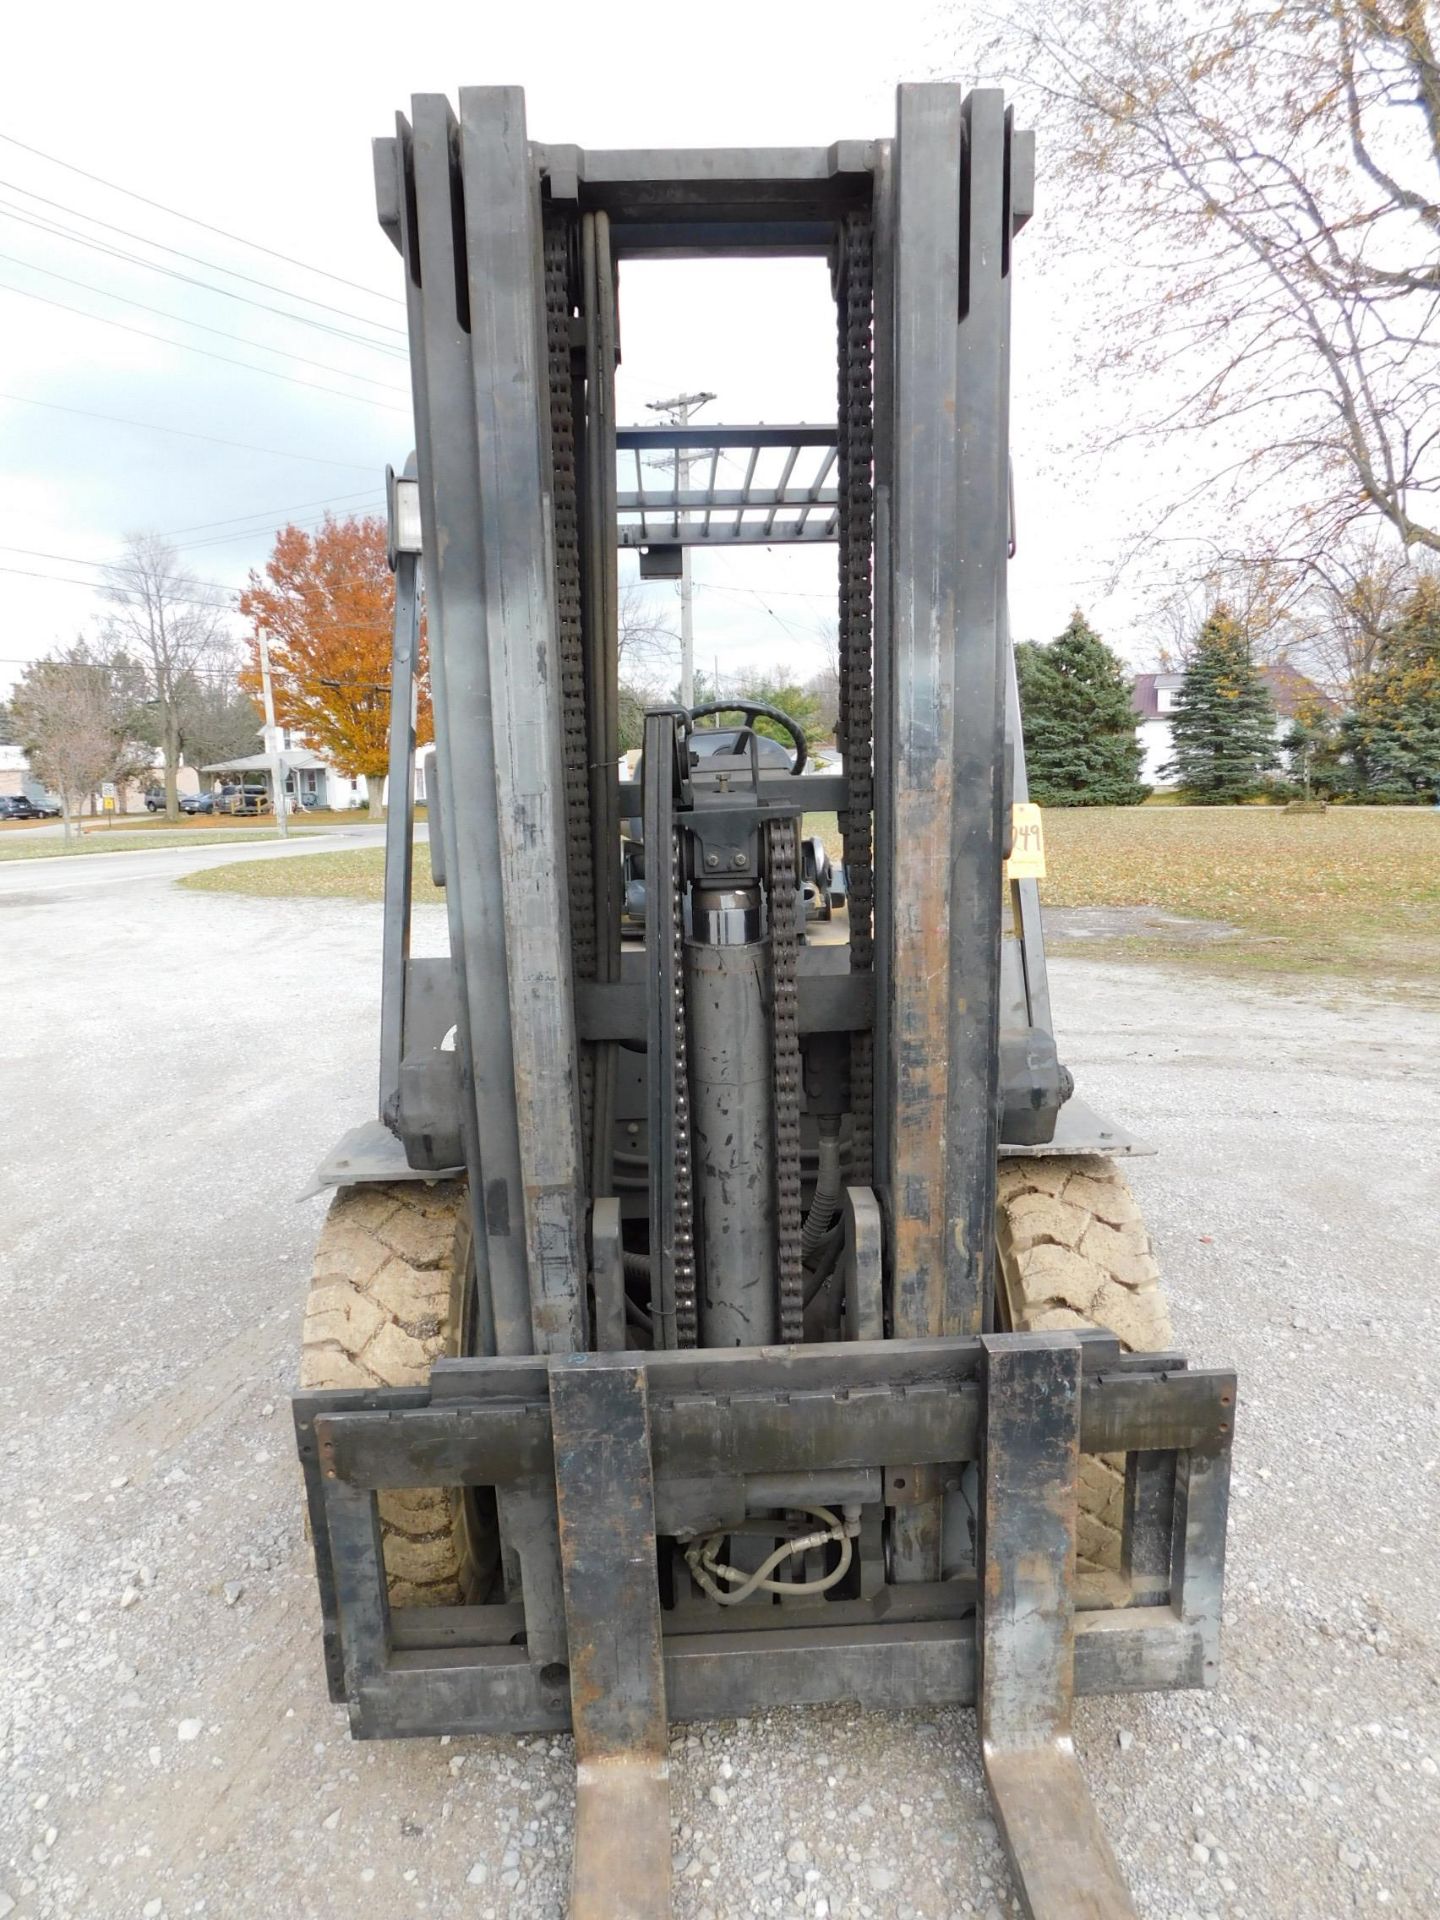 Daewoo Model G35S-2 Forklift, SN G2-00191, 6,700 lb. cap., LP, Solid Pneumatic Non-Marking Tires, - Image 10 of 20